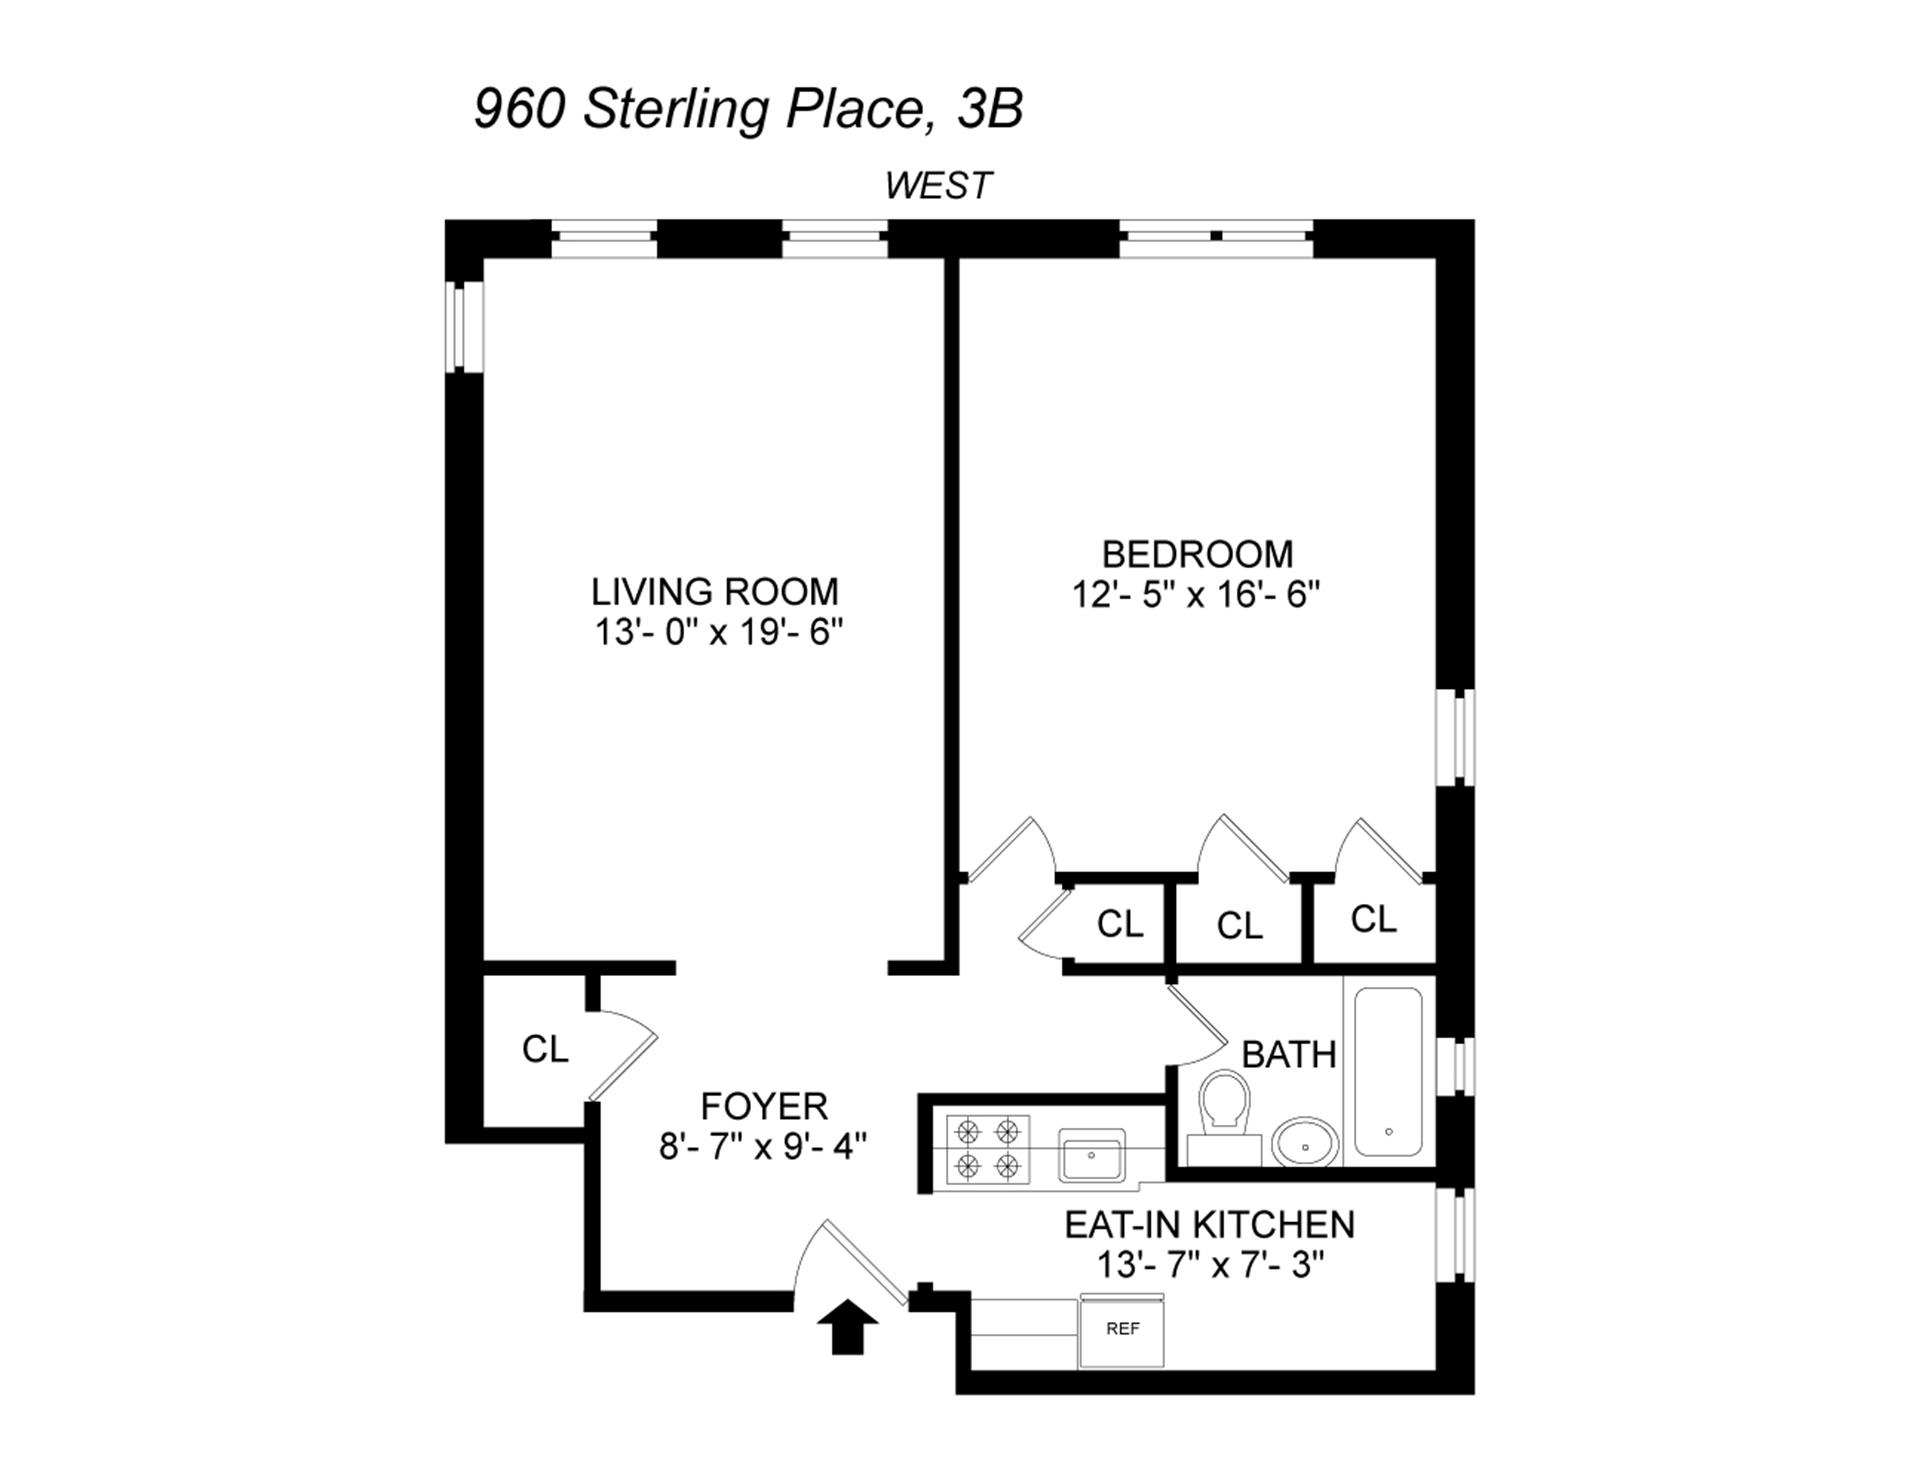 Floorplan for 960 Sterling Place, 3B